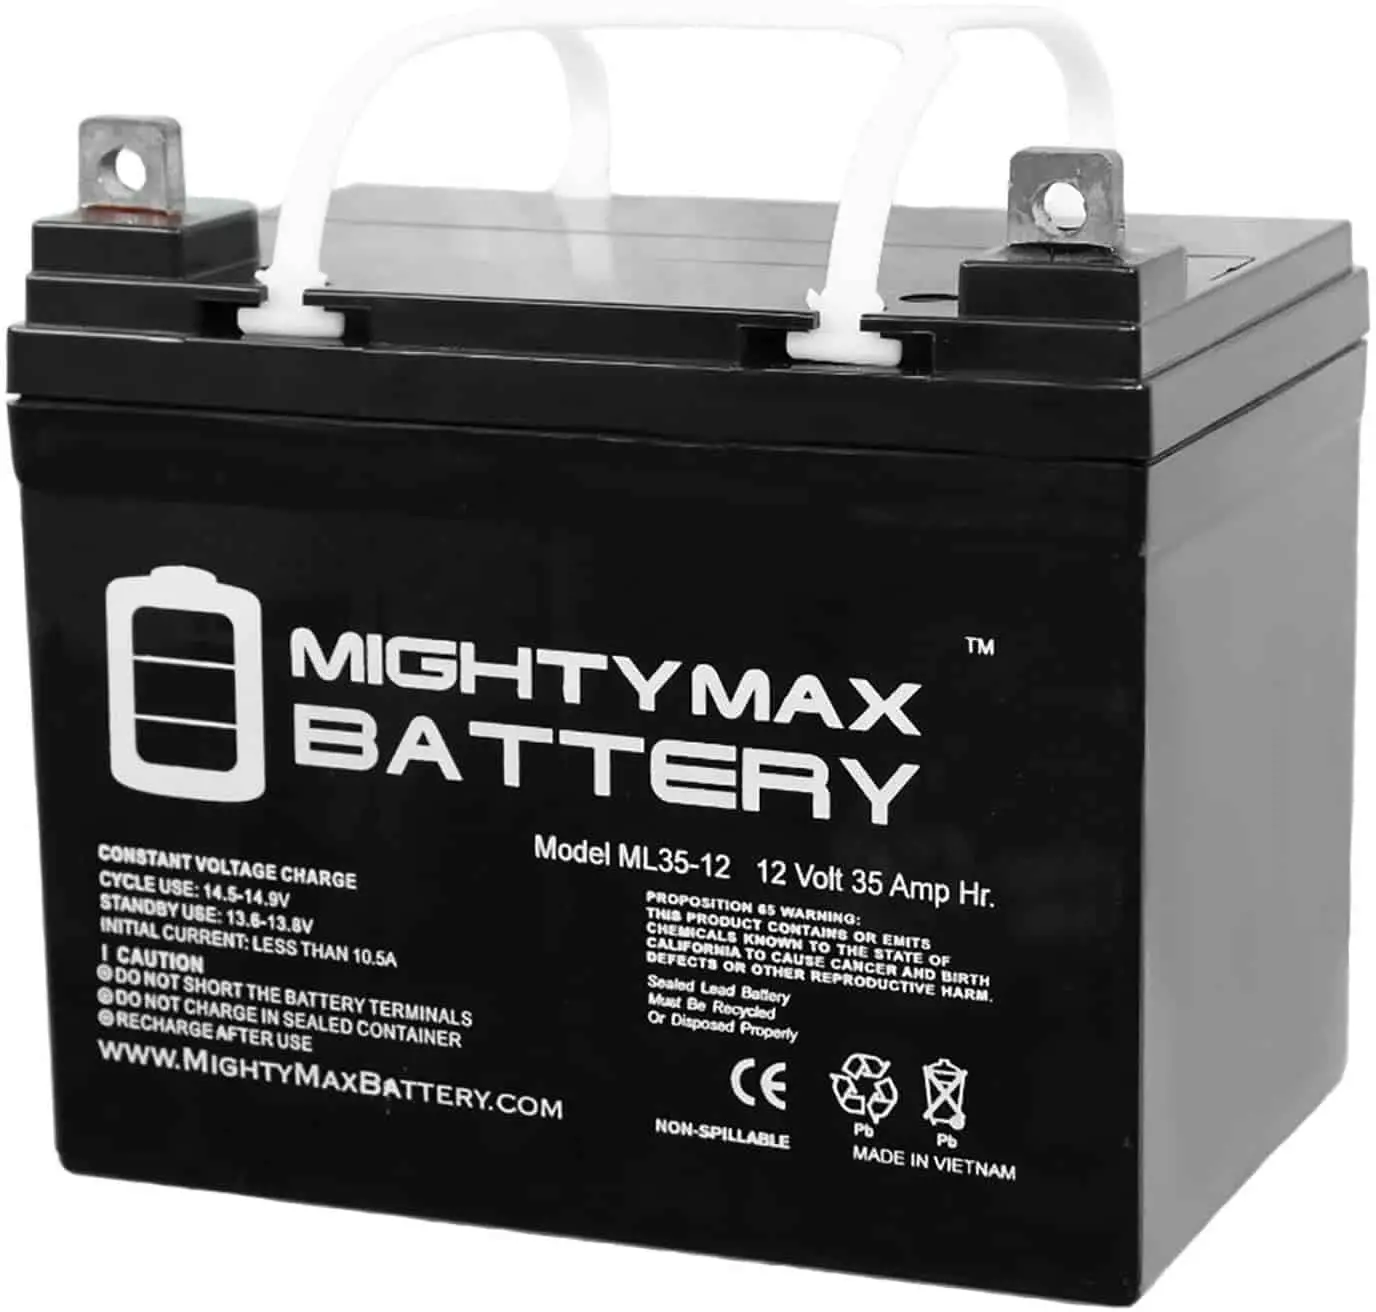 Mighty Max ML35-12 12V Battery Review